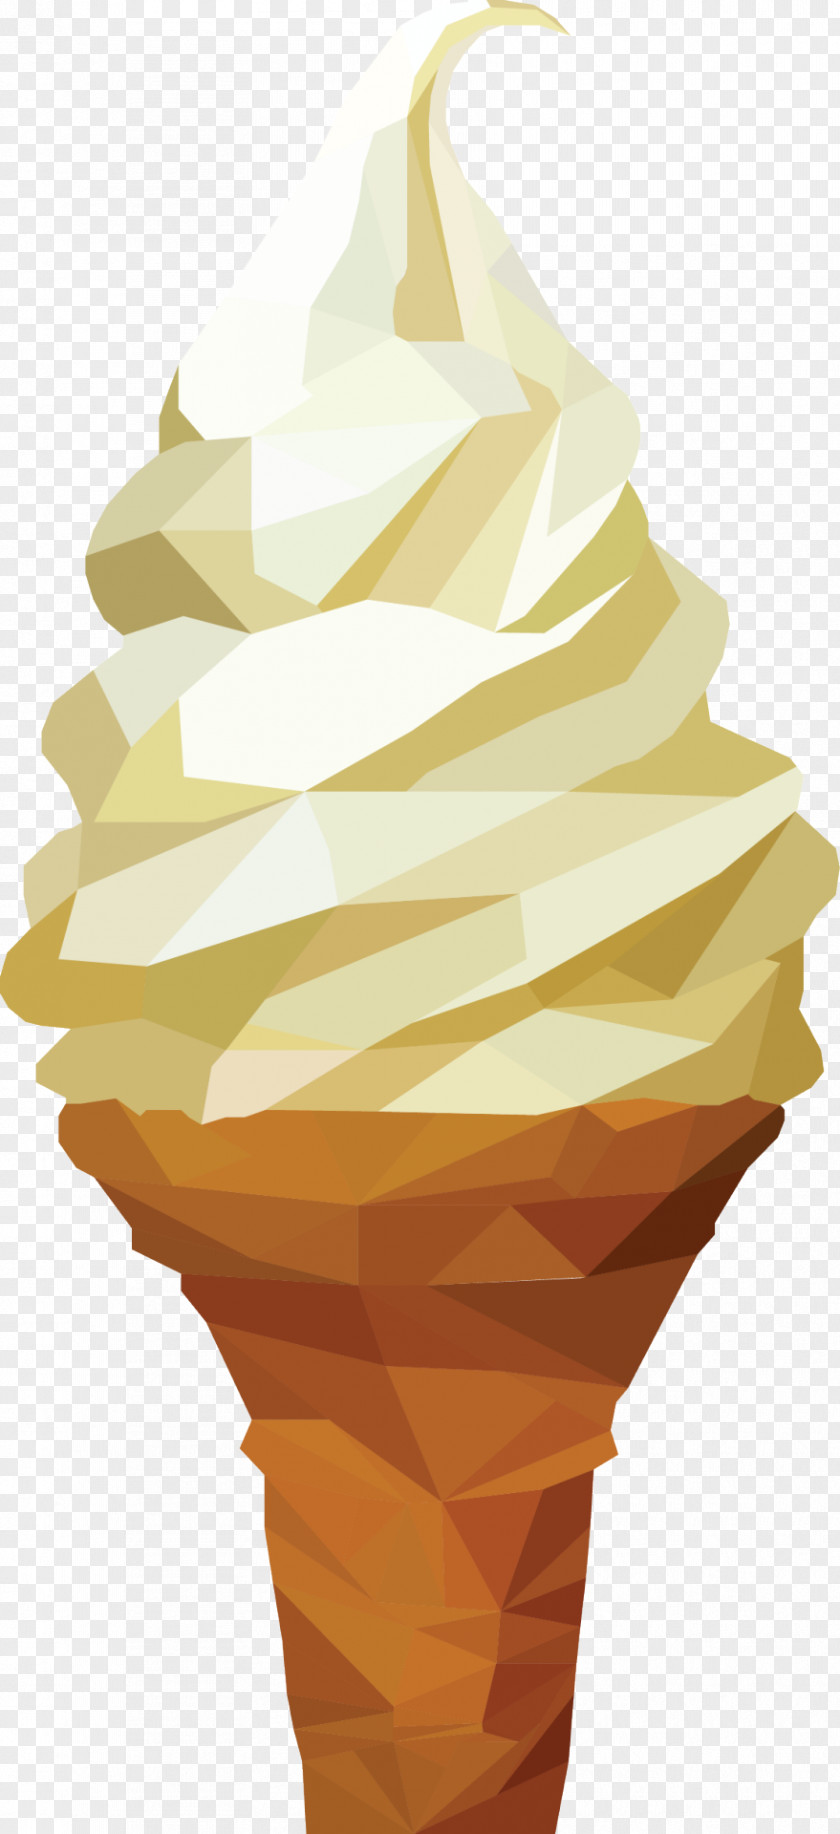 Hand-painted Ice Cream Cone Graphic Design PNG